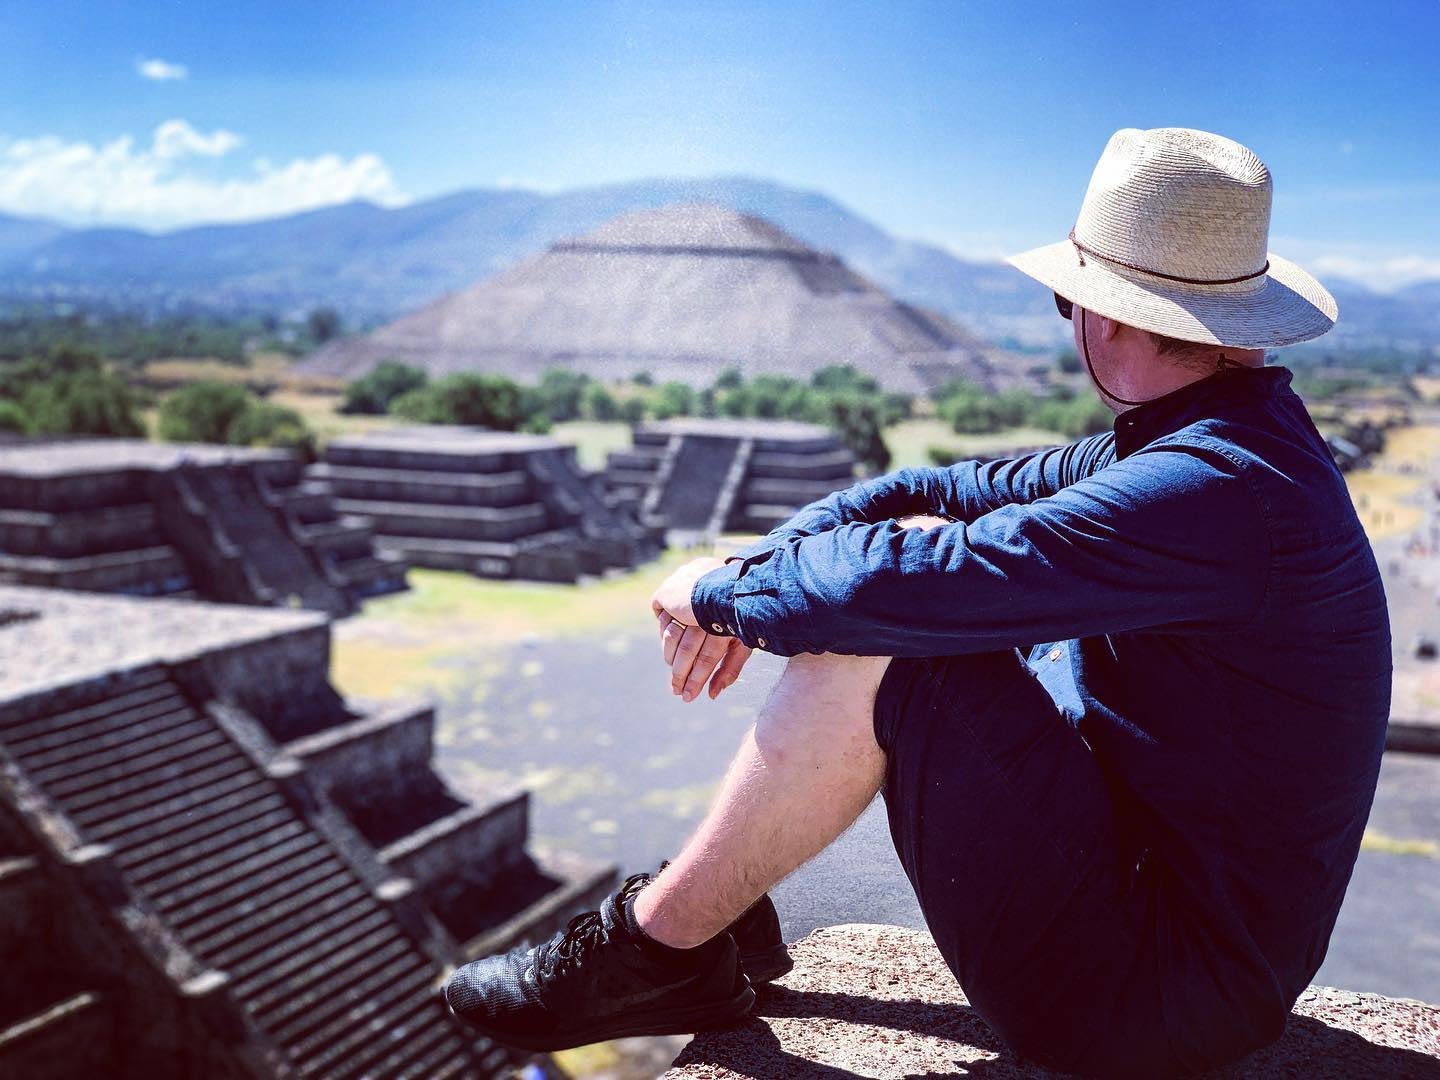 Filmed it with my eyes 👁🎥 question, how to export video file now?
—
#stopmotion #teotihuacan #pyramidofthesun #travel #adventure #explore #workandtravel #audiovisual #filming #travelvideos #aftermovie #filmlocation #piramidedelsol